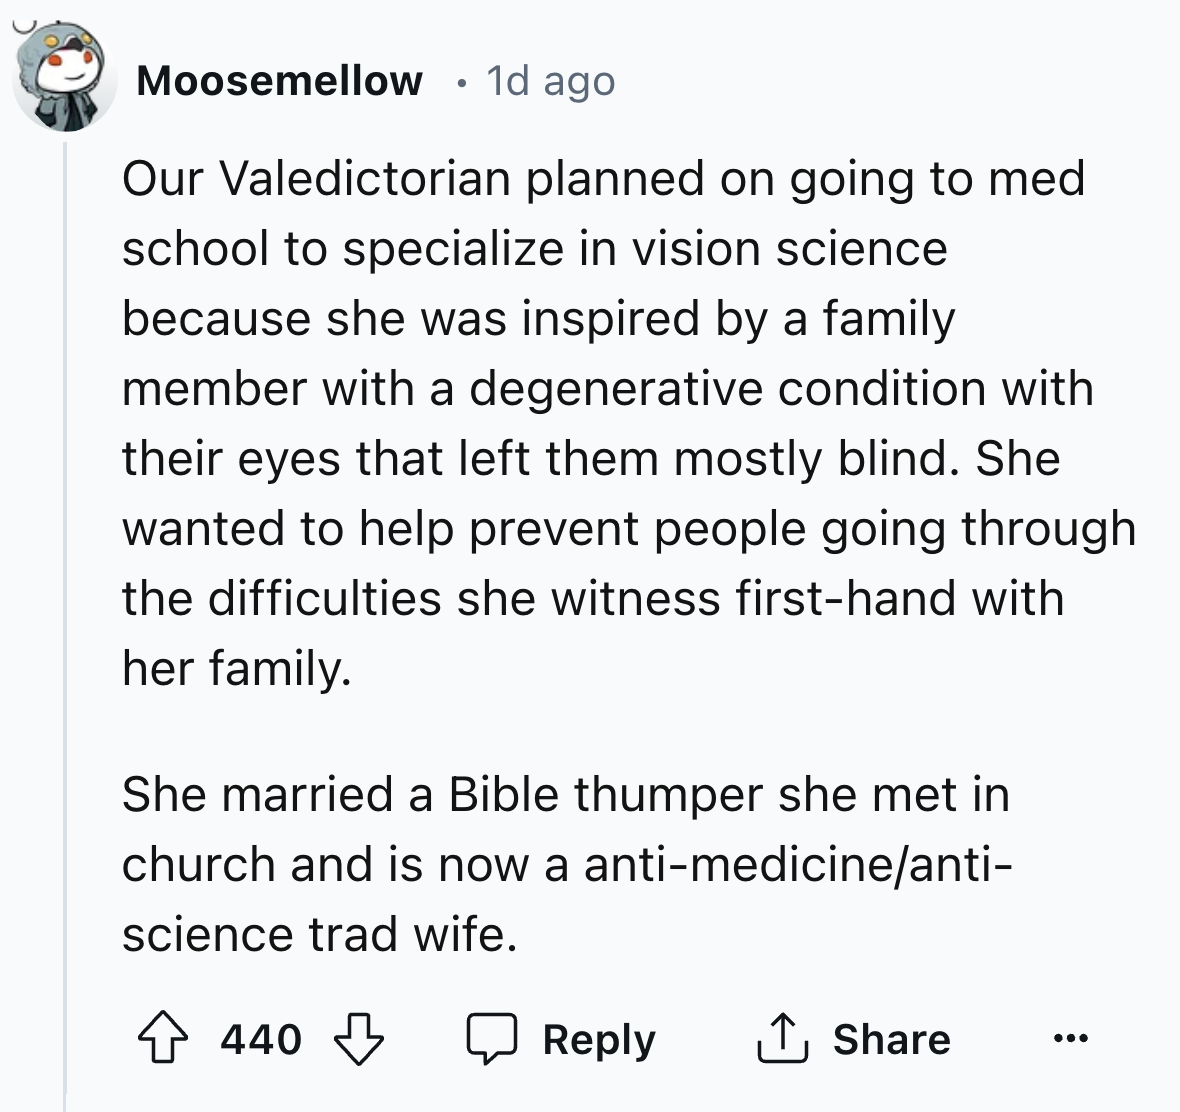 screenshot - Moosemellow 1d ago Our Valedictorian planned on going to med school to specialize in vision science because she was inspired by a family member with a degenerative condition with their eyes that left them mostly blind. She wanted to help prev